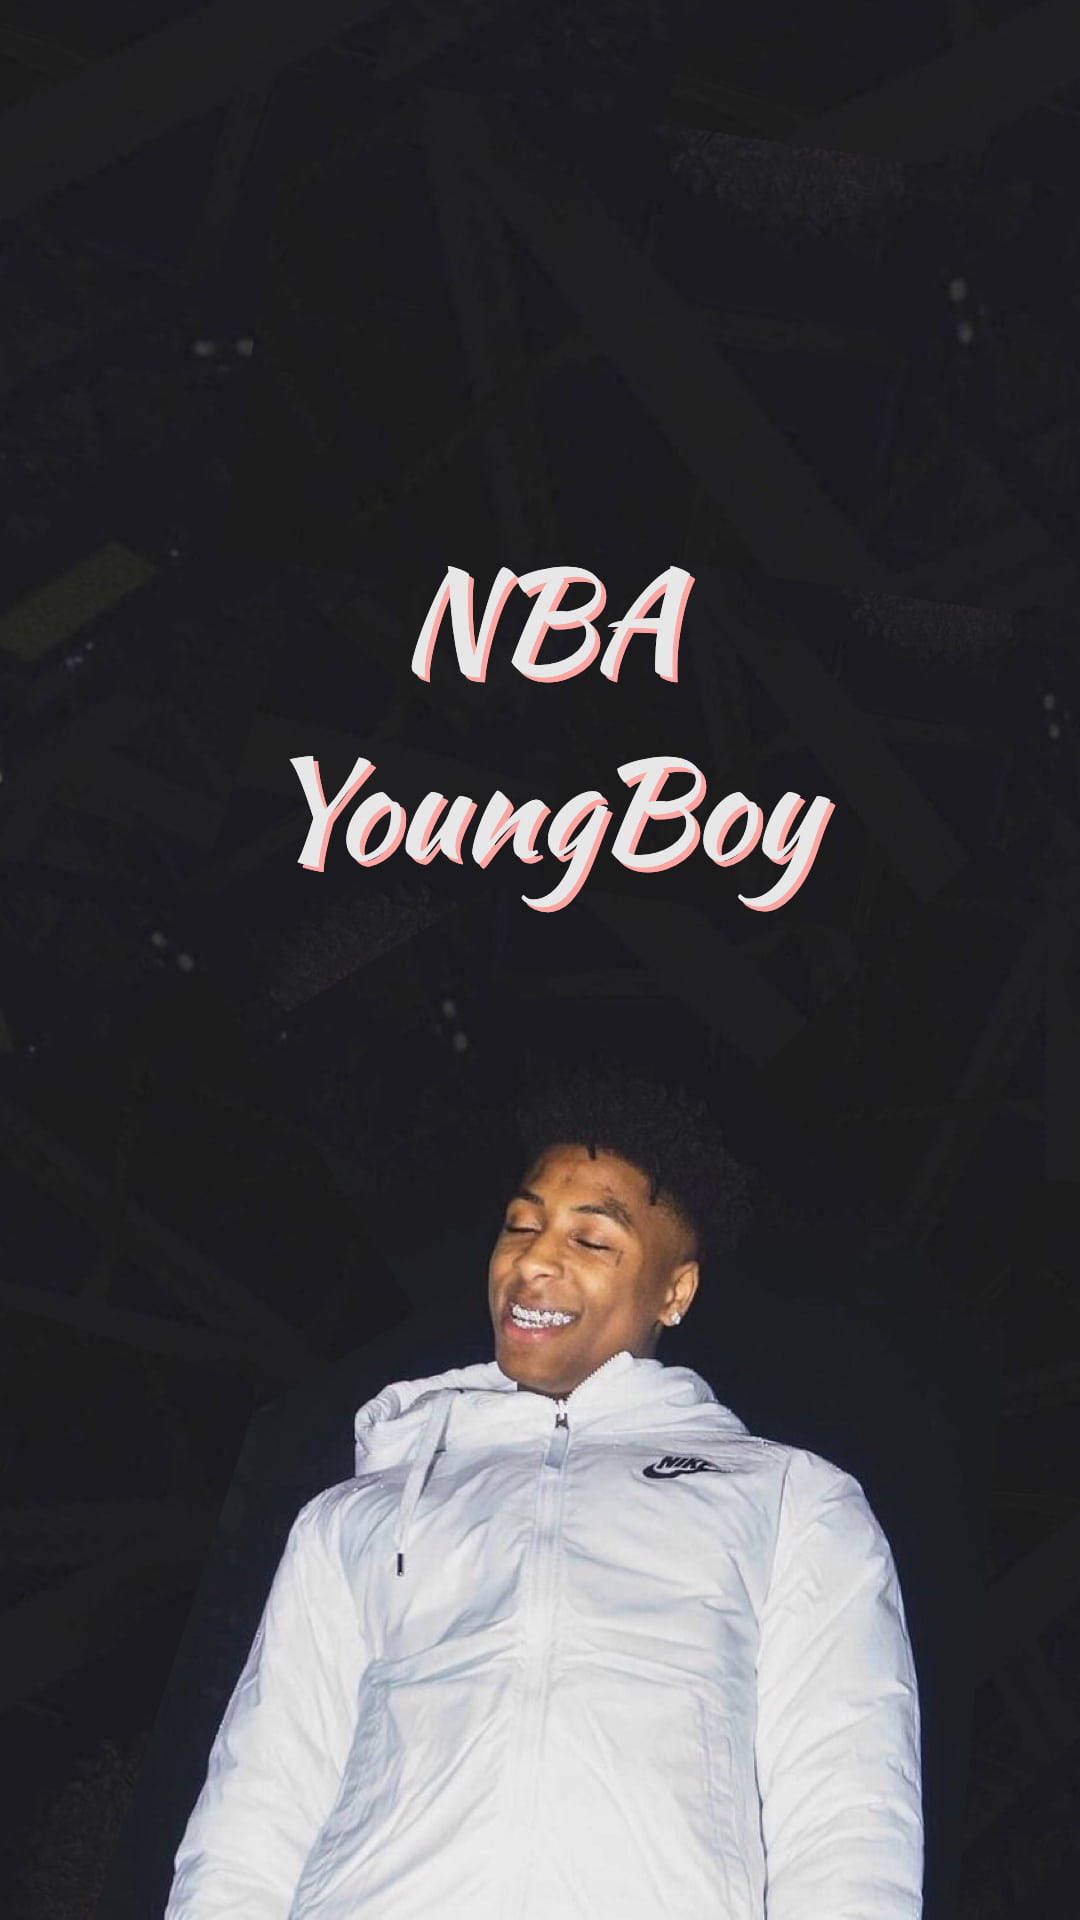 Free Nba Youngboy Wallpaper Downloads, Nba Youngboy Wallpaper for FREE